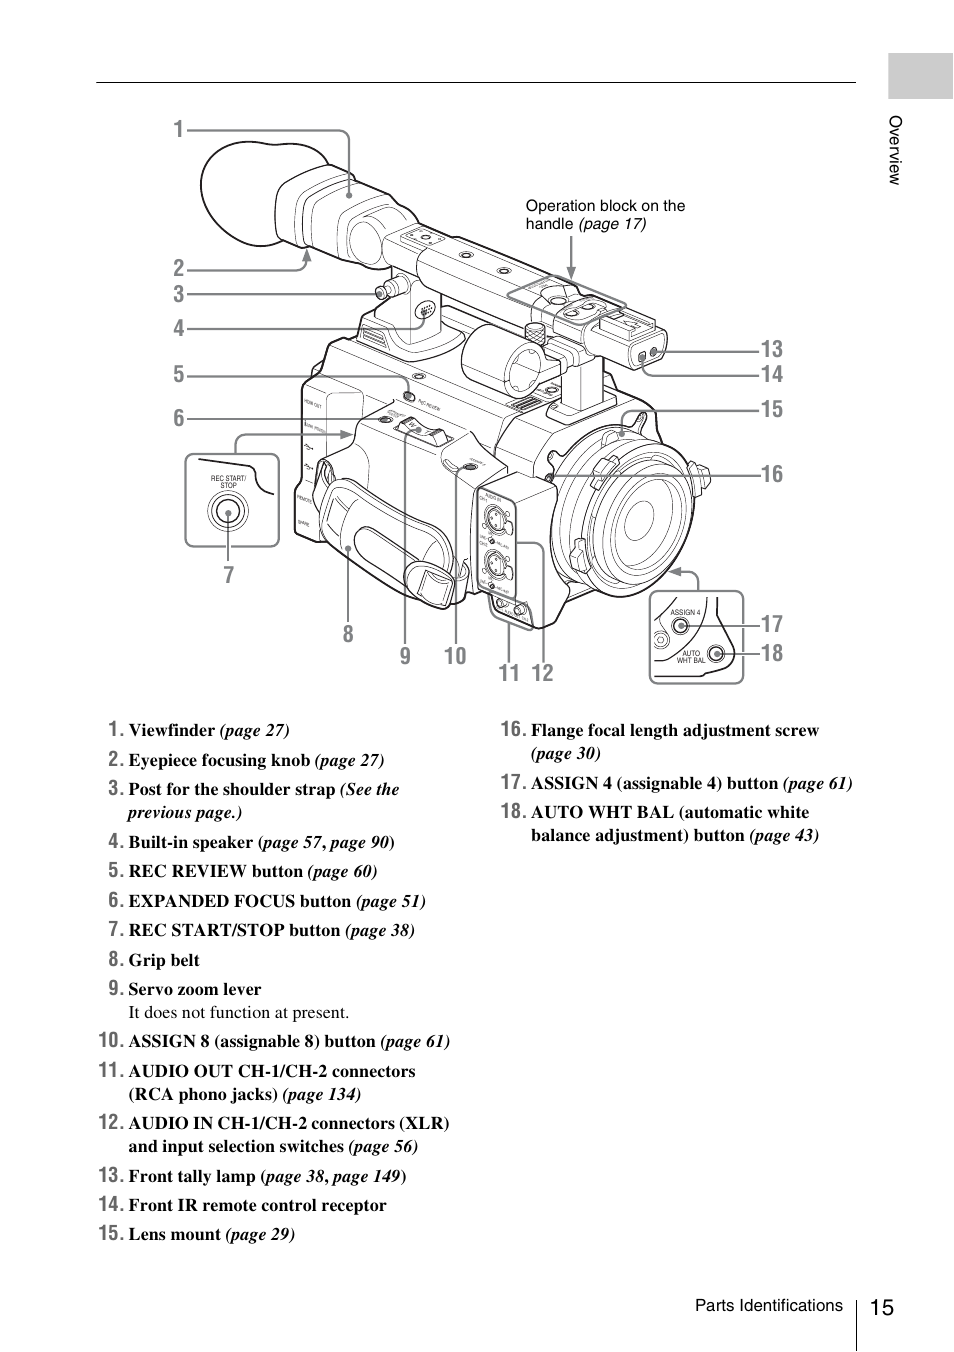 Viewfind er (page 27), Eyepiece focusing kno b (page 27), Built-in speaker ( page 57 , page 90 ) | Rec review button (page 60), Expanded focus butto n (page 51), Rec start/stop butto n (page 38), Grip belt, Servo zoom lever it does not function at present, Assign 8 (assignable 8) button (page 61), Front ir remote control receptor | Sony PMW-F3K User Manual | Page 15 / 164